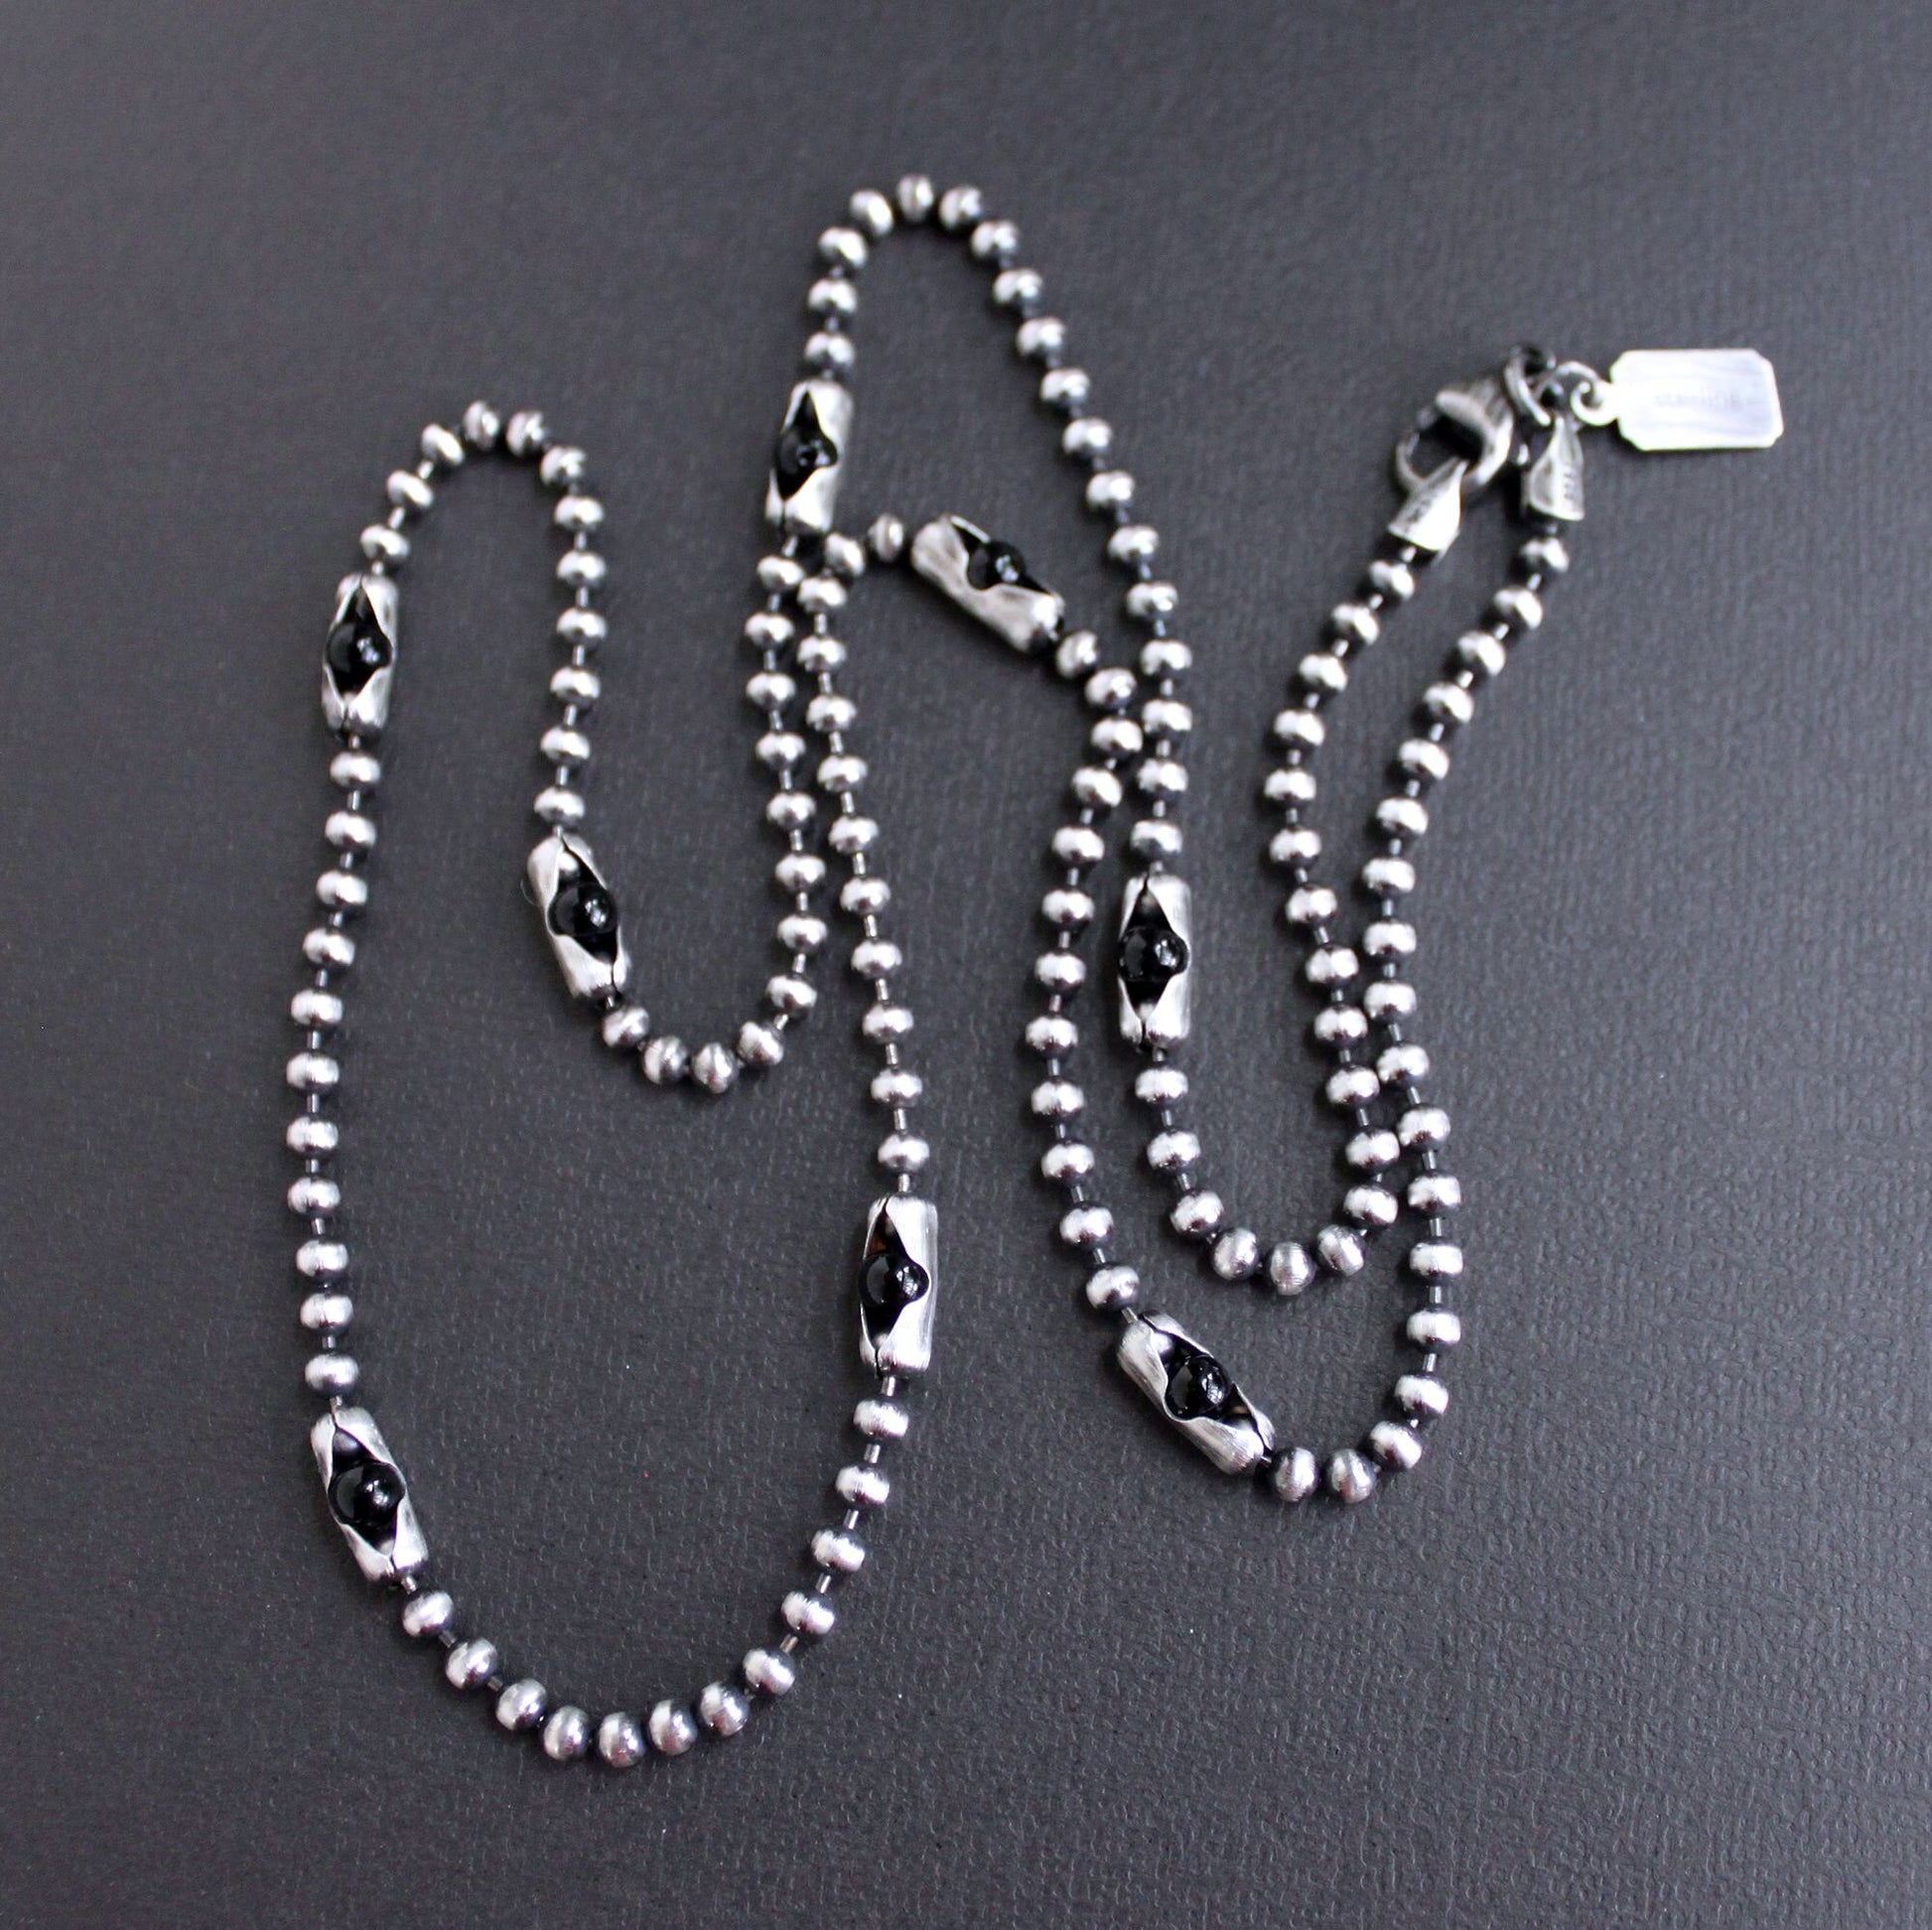 Necklace for men: onyx & silver beads